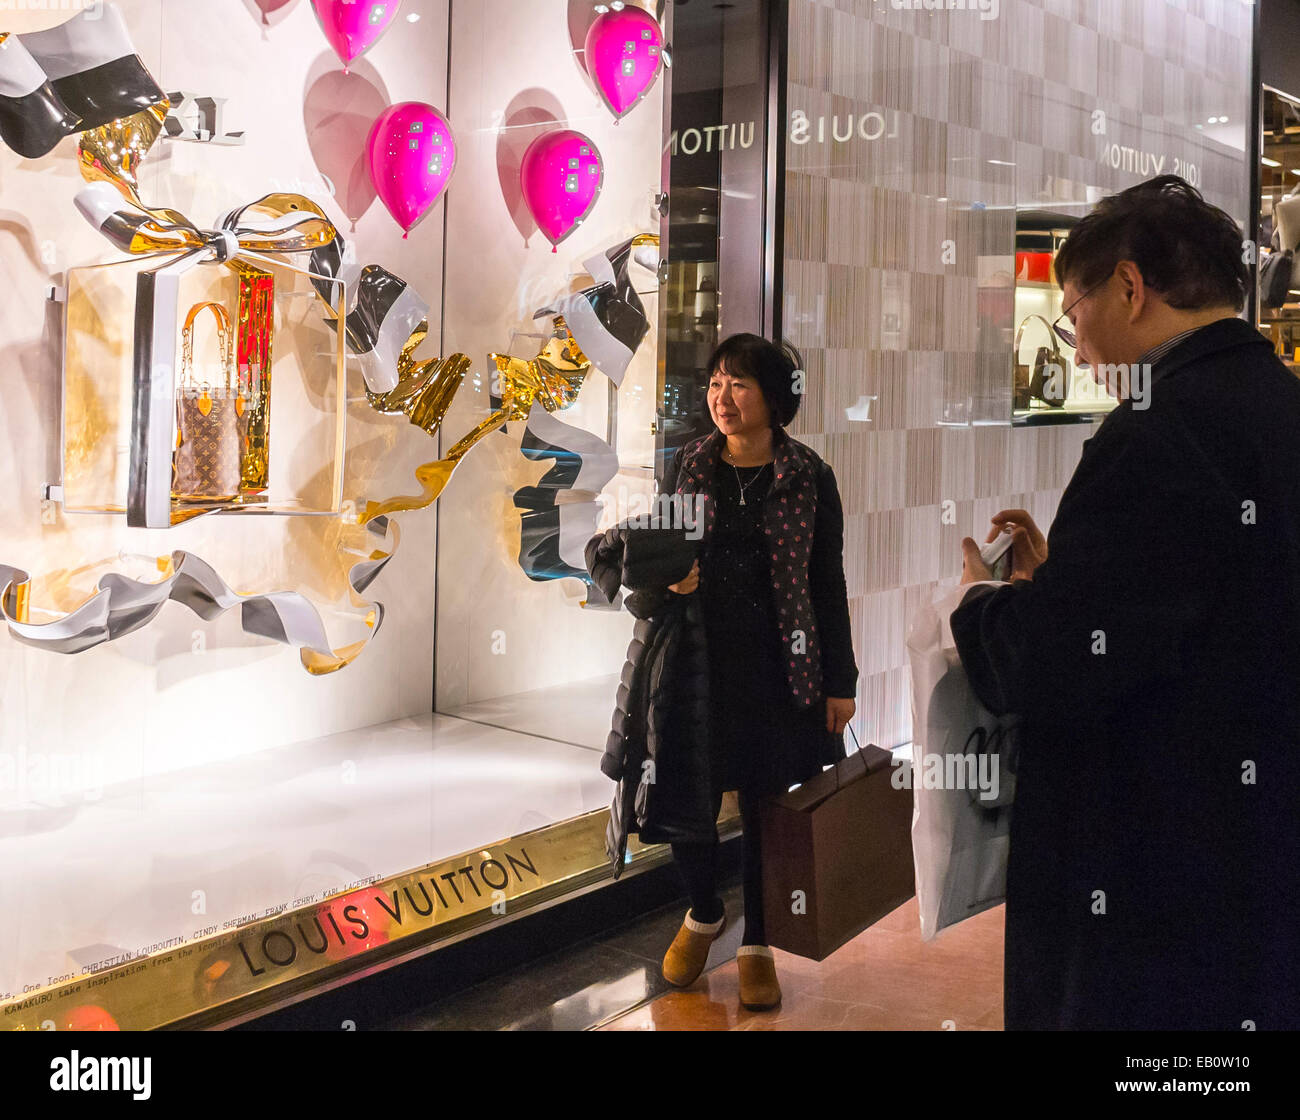 Paris, France, People Shopping inside Louis Vuitton Luxury Clothing Store  Stock Photo - Alamy